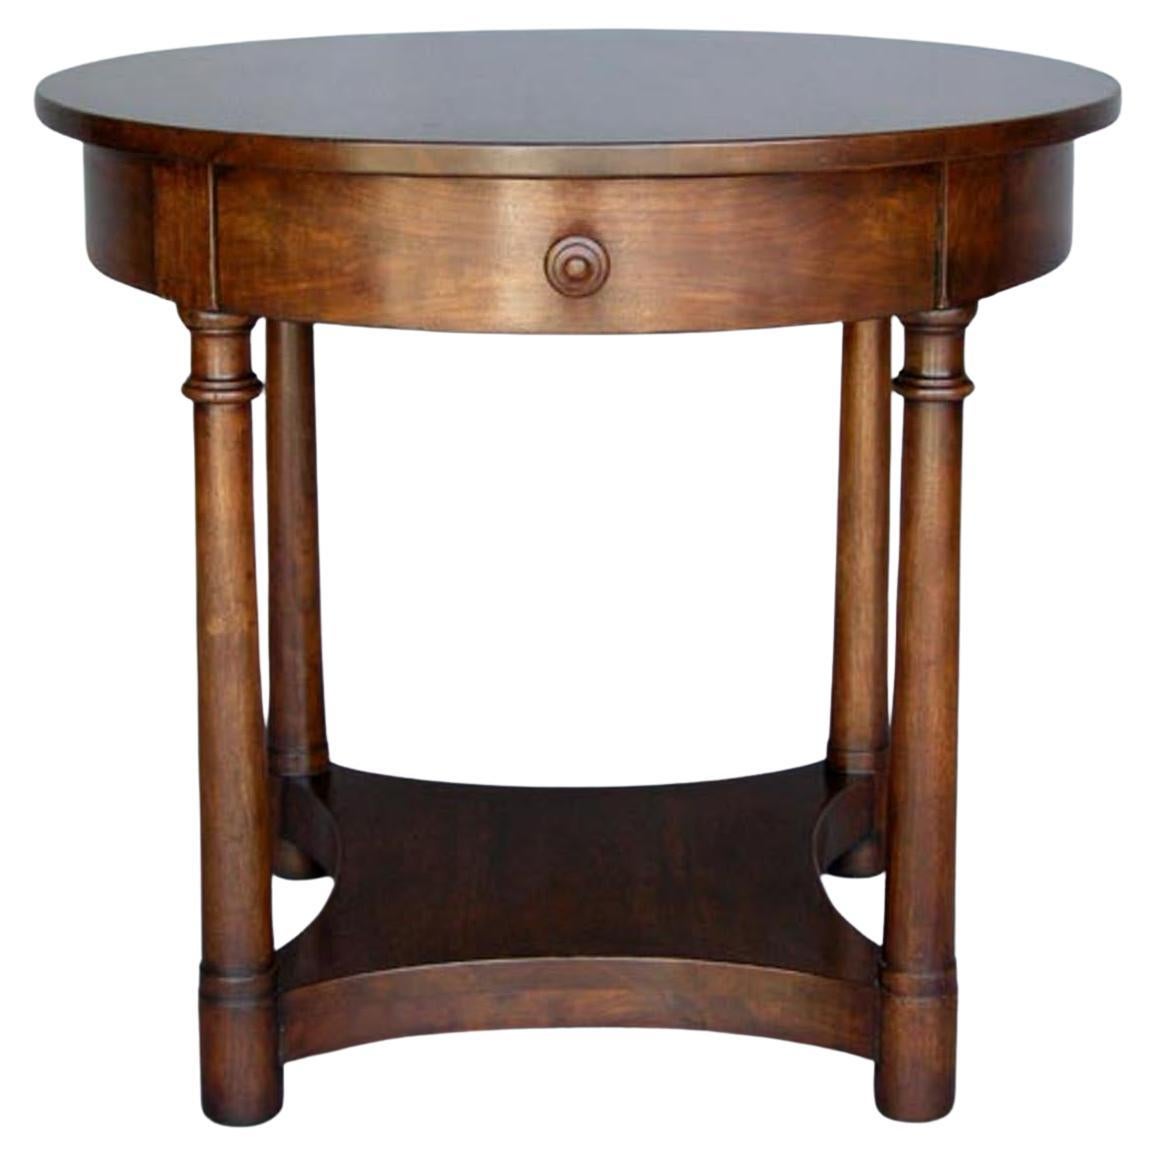 Dos Gallos Studio Custom Round Edna Table with Drawer and Shelf